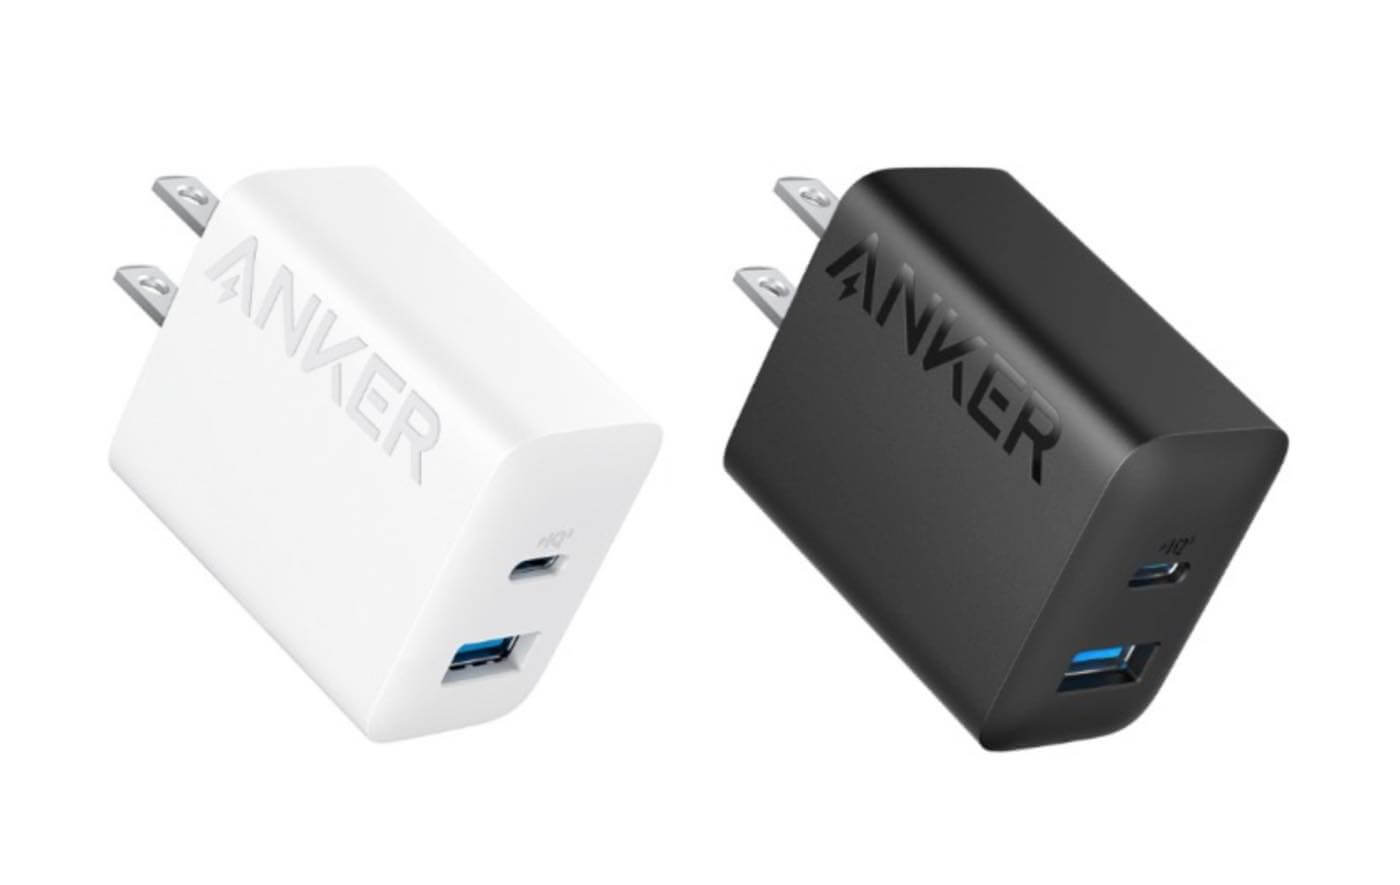 Anker、2ポート搭載で最大20W出力が可能なUSB急速充電｢Anker Charger (20W, 2-Port)｣を発売